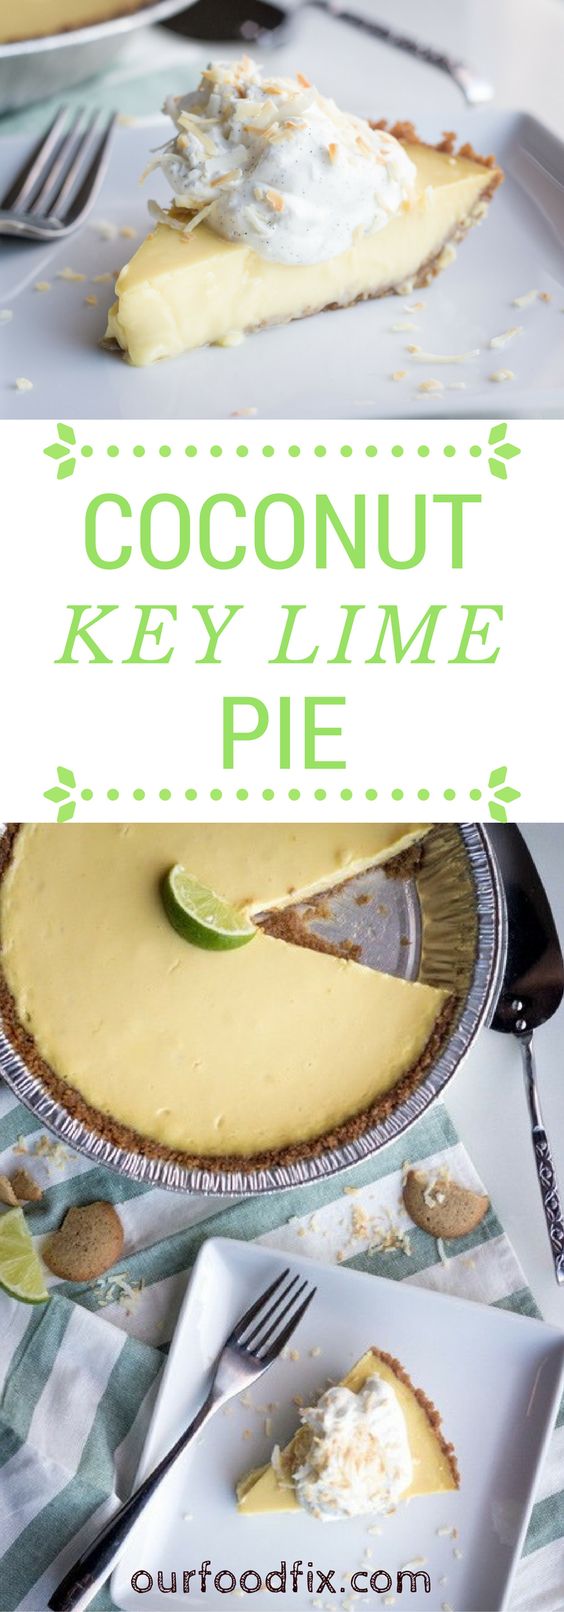 A creamy, rich yet light, wonderfully sweet-tart pie perfect for your Easter table or next holiday gathering. Hint, serve the pie partially frozen for a special warm weather treat! Dessert recipes | Key lime pie | Coconut key lime | Pie recipes | Easter recipes | Holiday recipes | Easter desserts | Make ahead dishes